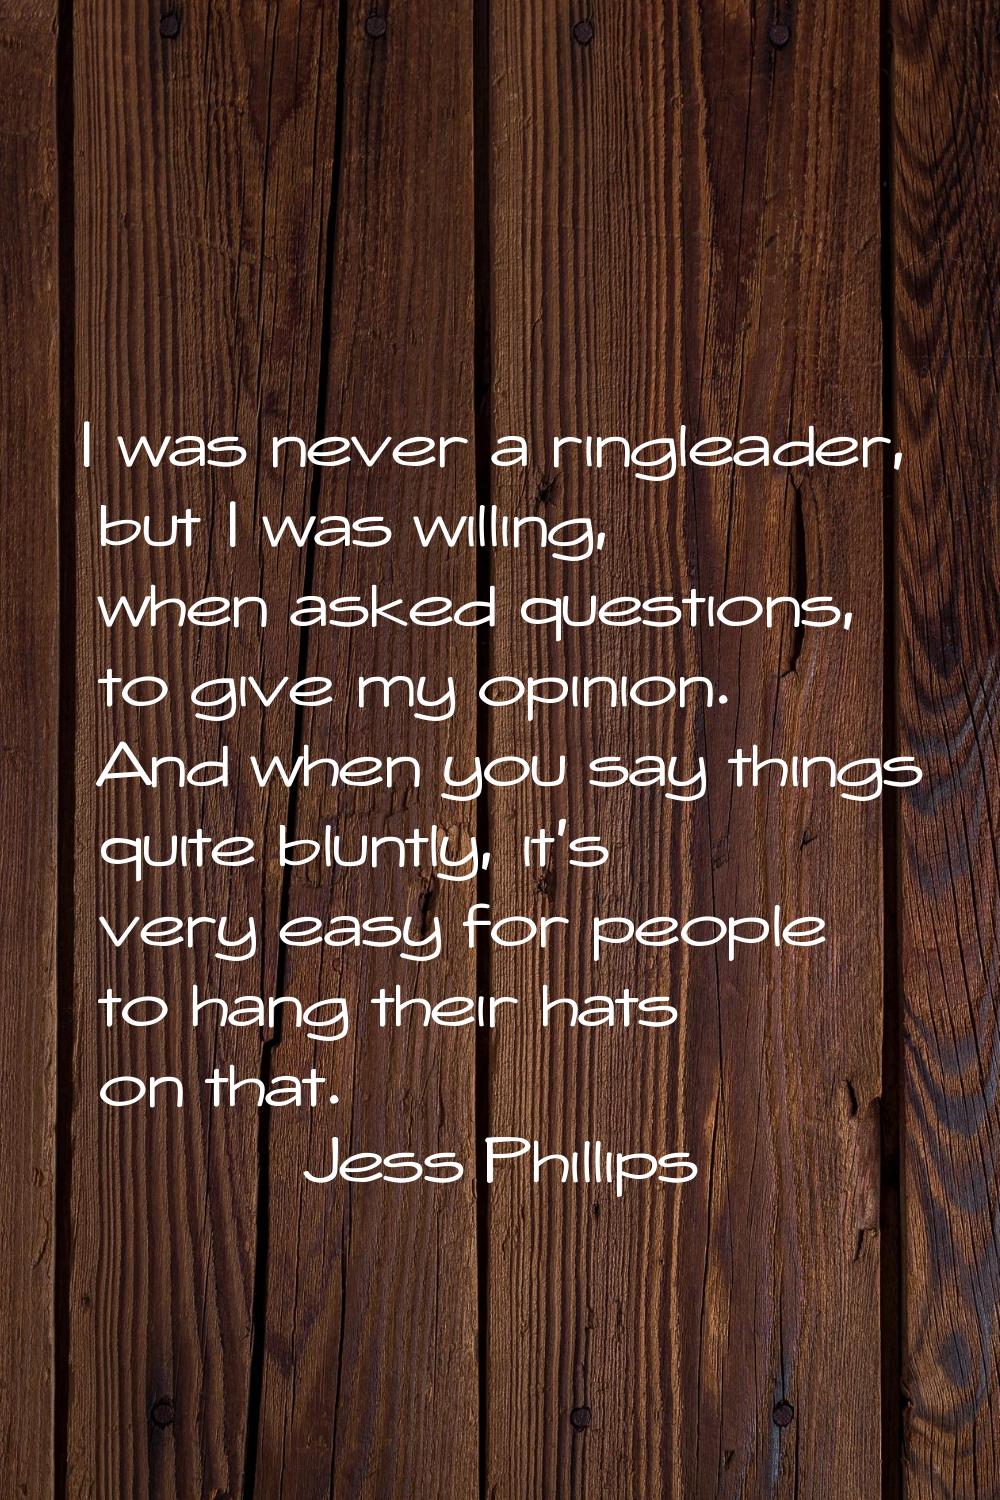 I was never a ringleader, but I was willing, when asked questions, to give my opinion. And when you